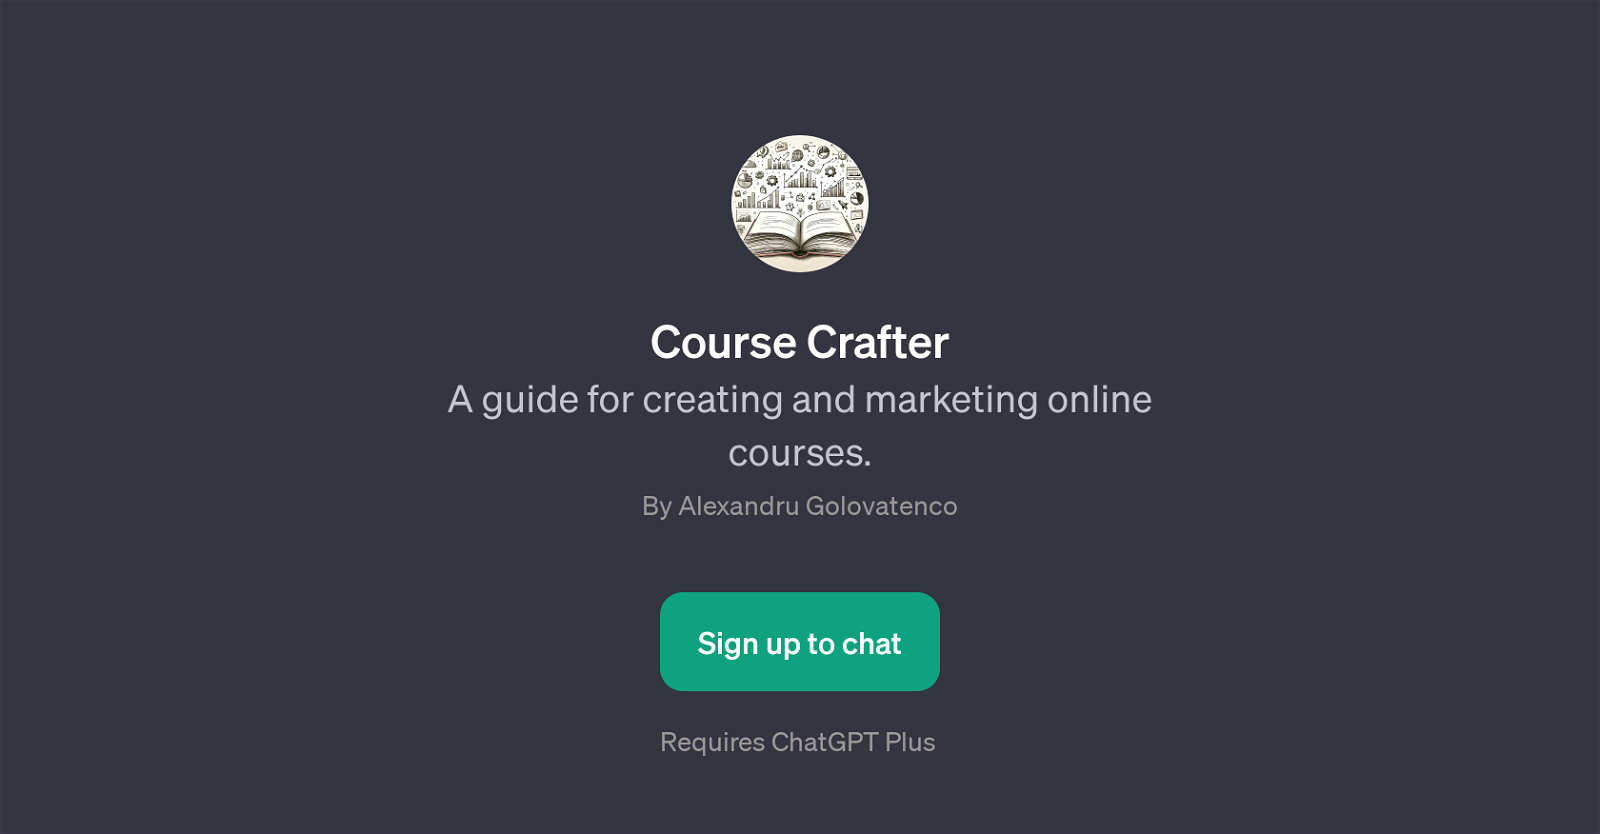 Course Crafter website